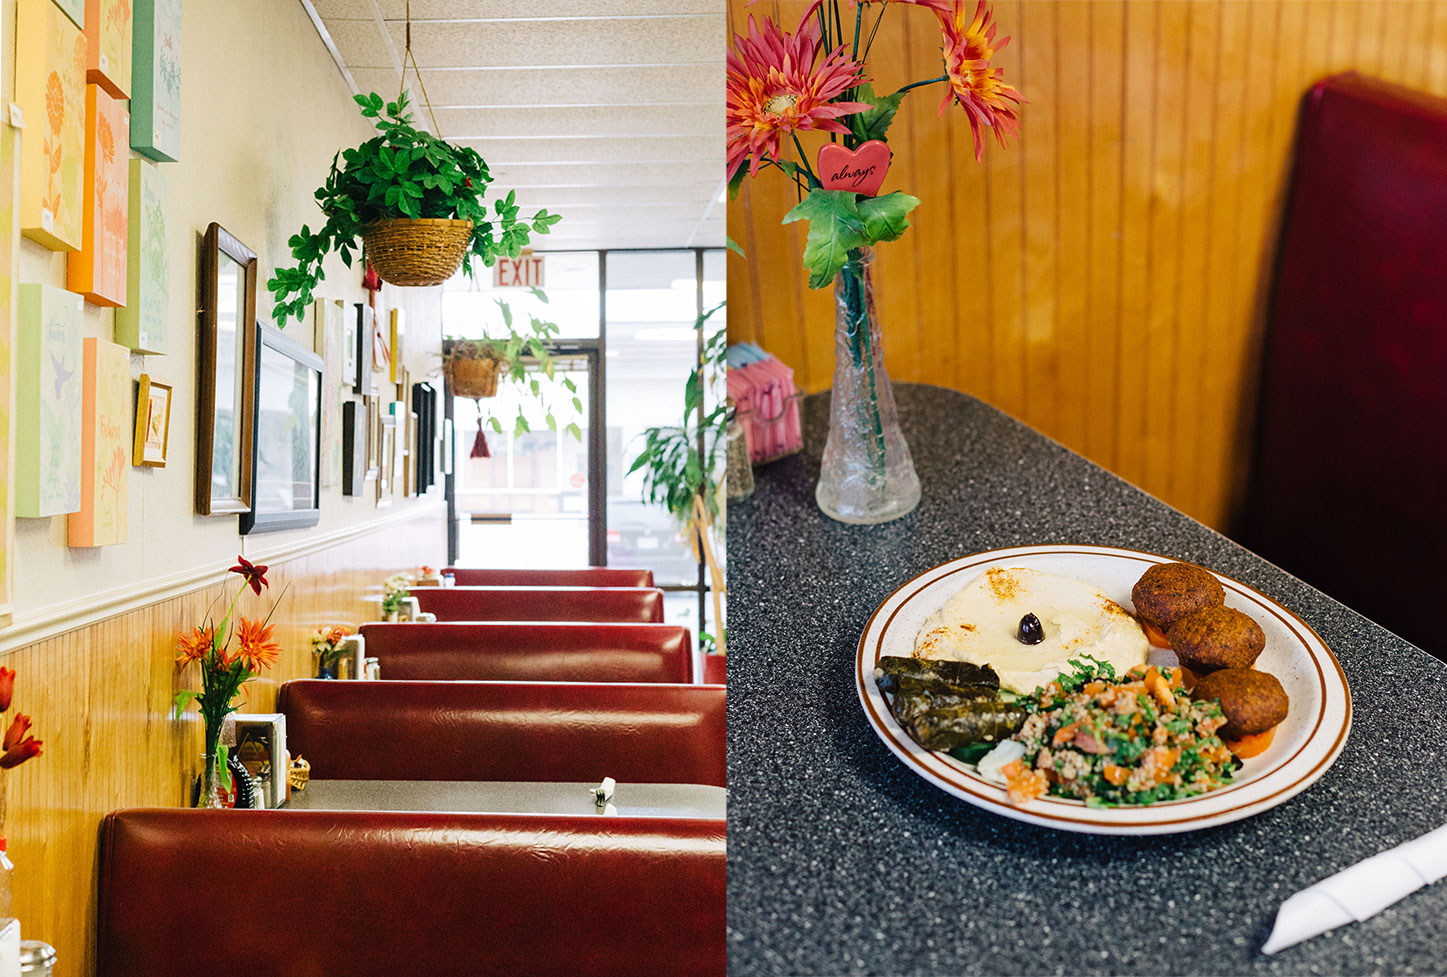 Tony's Cafe had been in business since 1989 // photos Emilee Prado